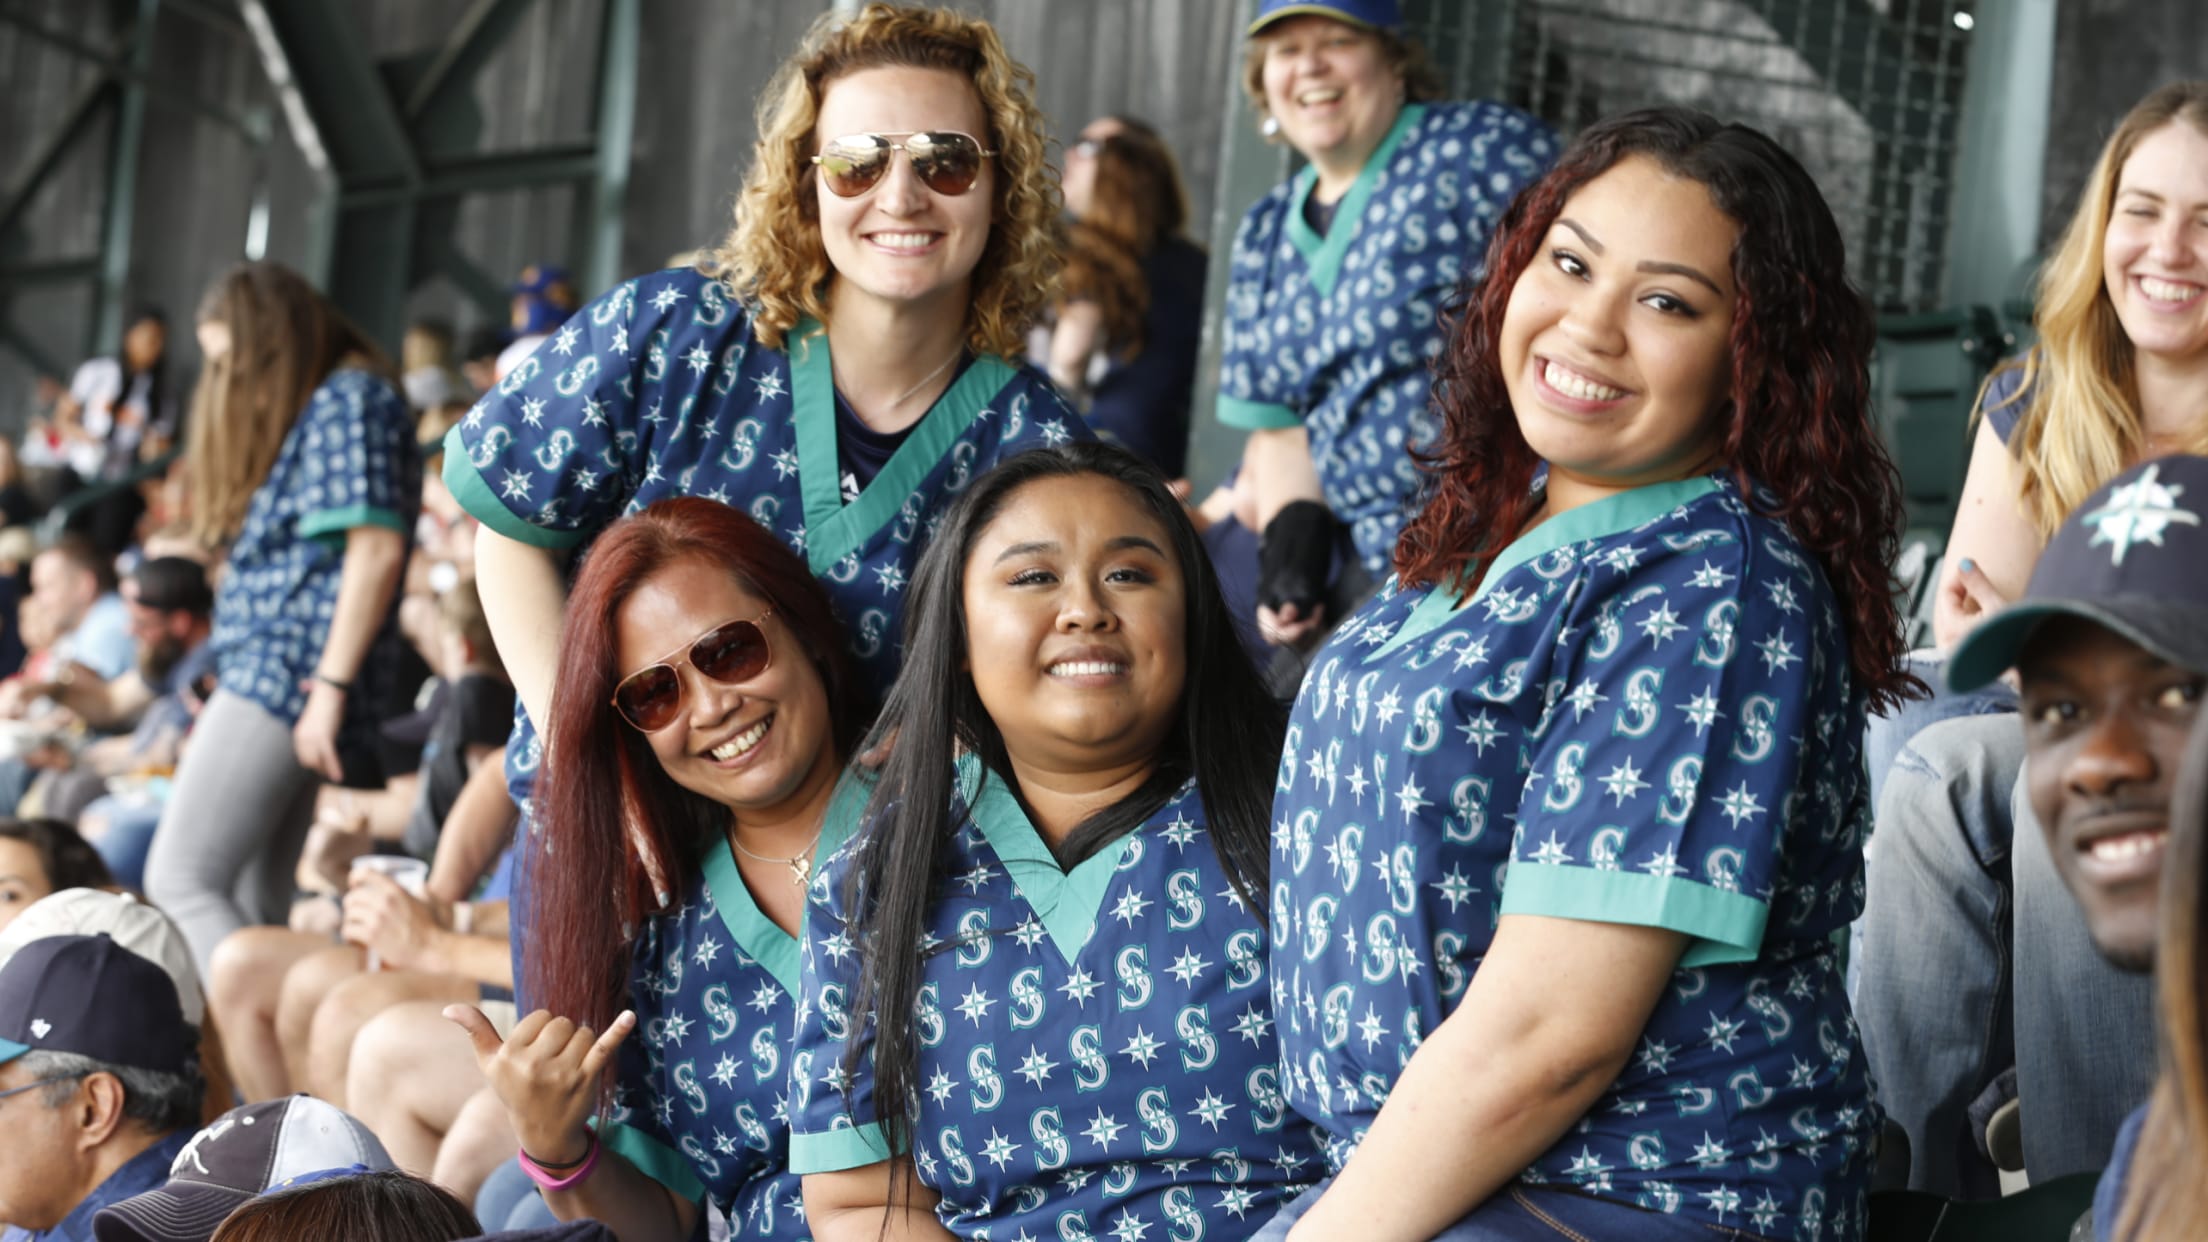 What to Look For in the 2022 Mariners Promotional Schedule - Lookout Landing